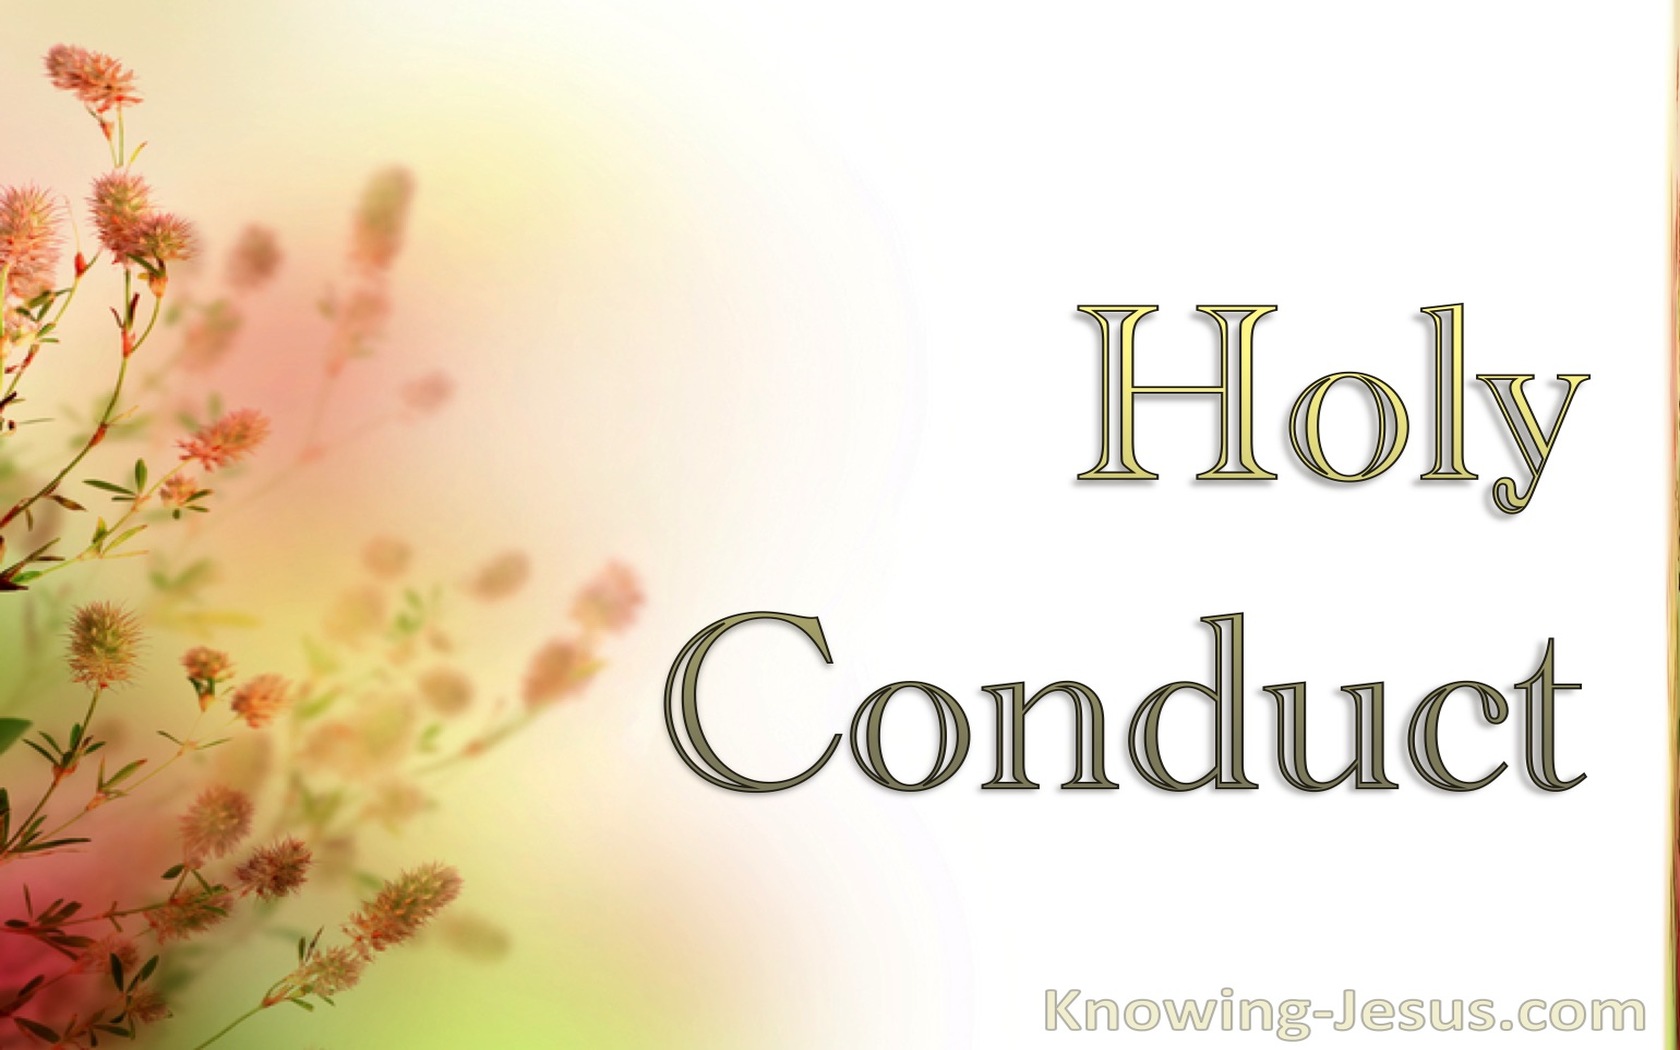 Holy Conduct (devotional)10-20 (white)